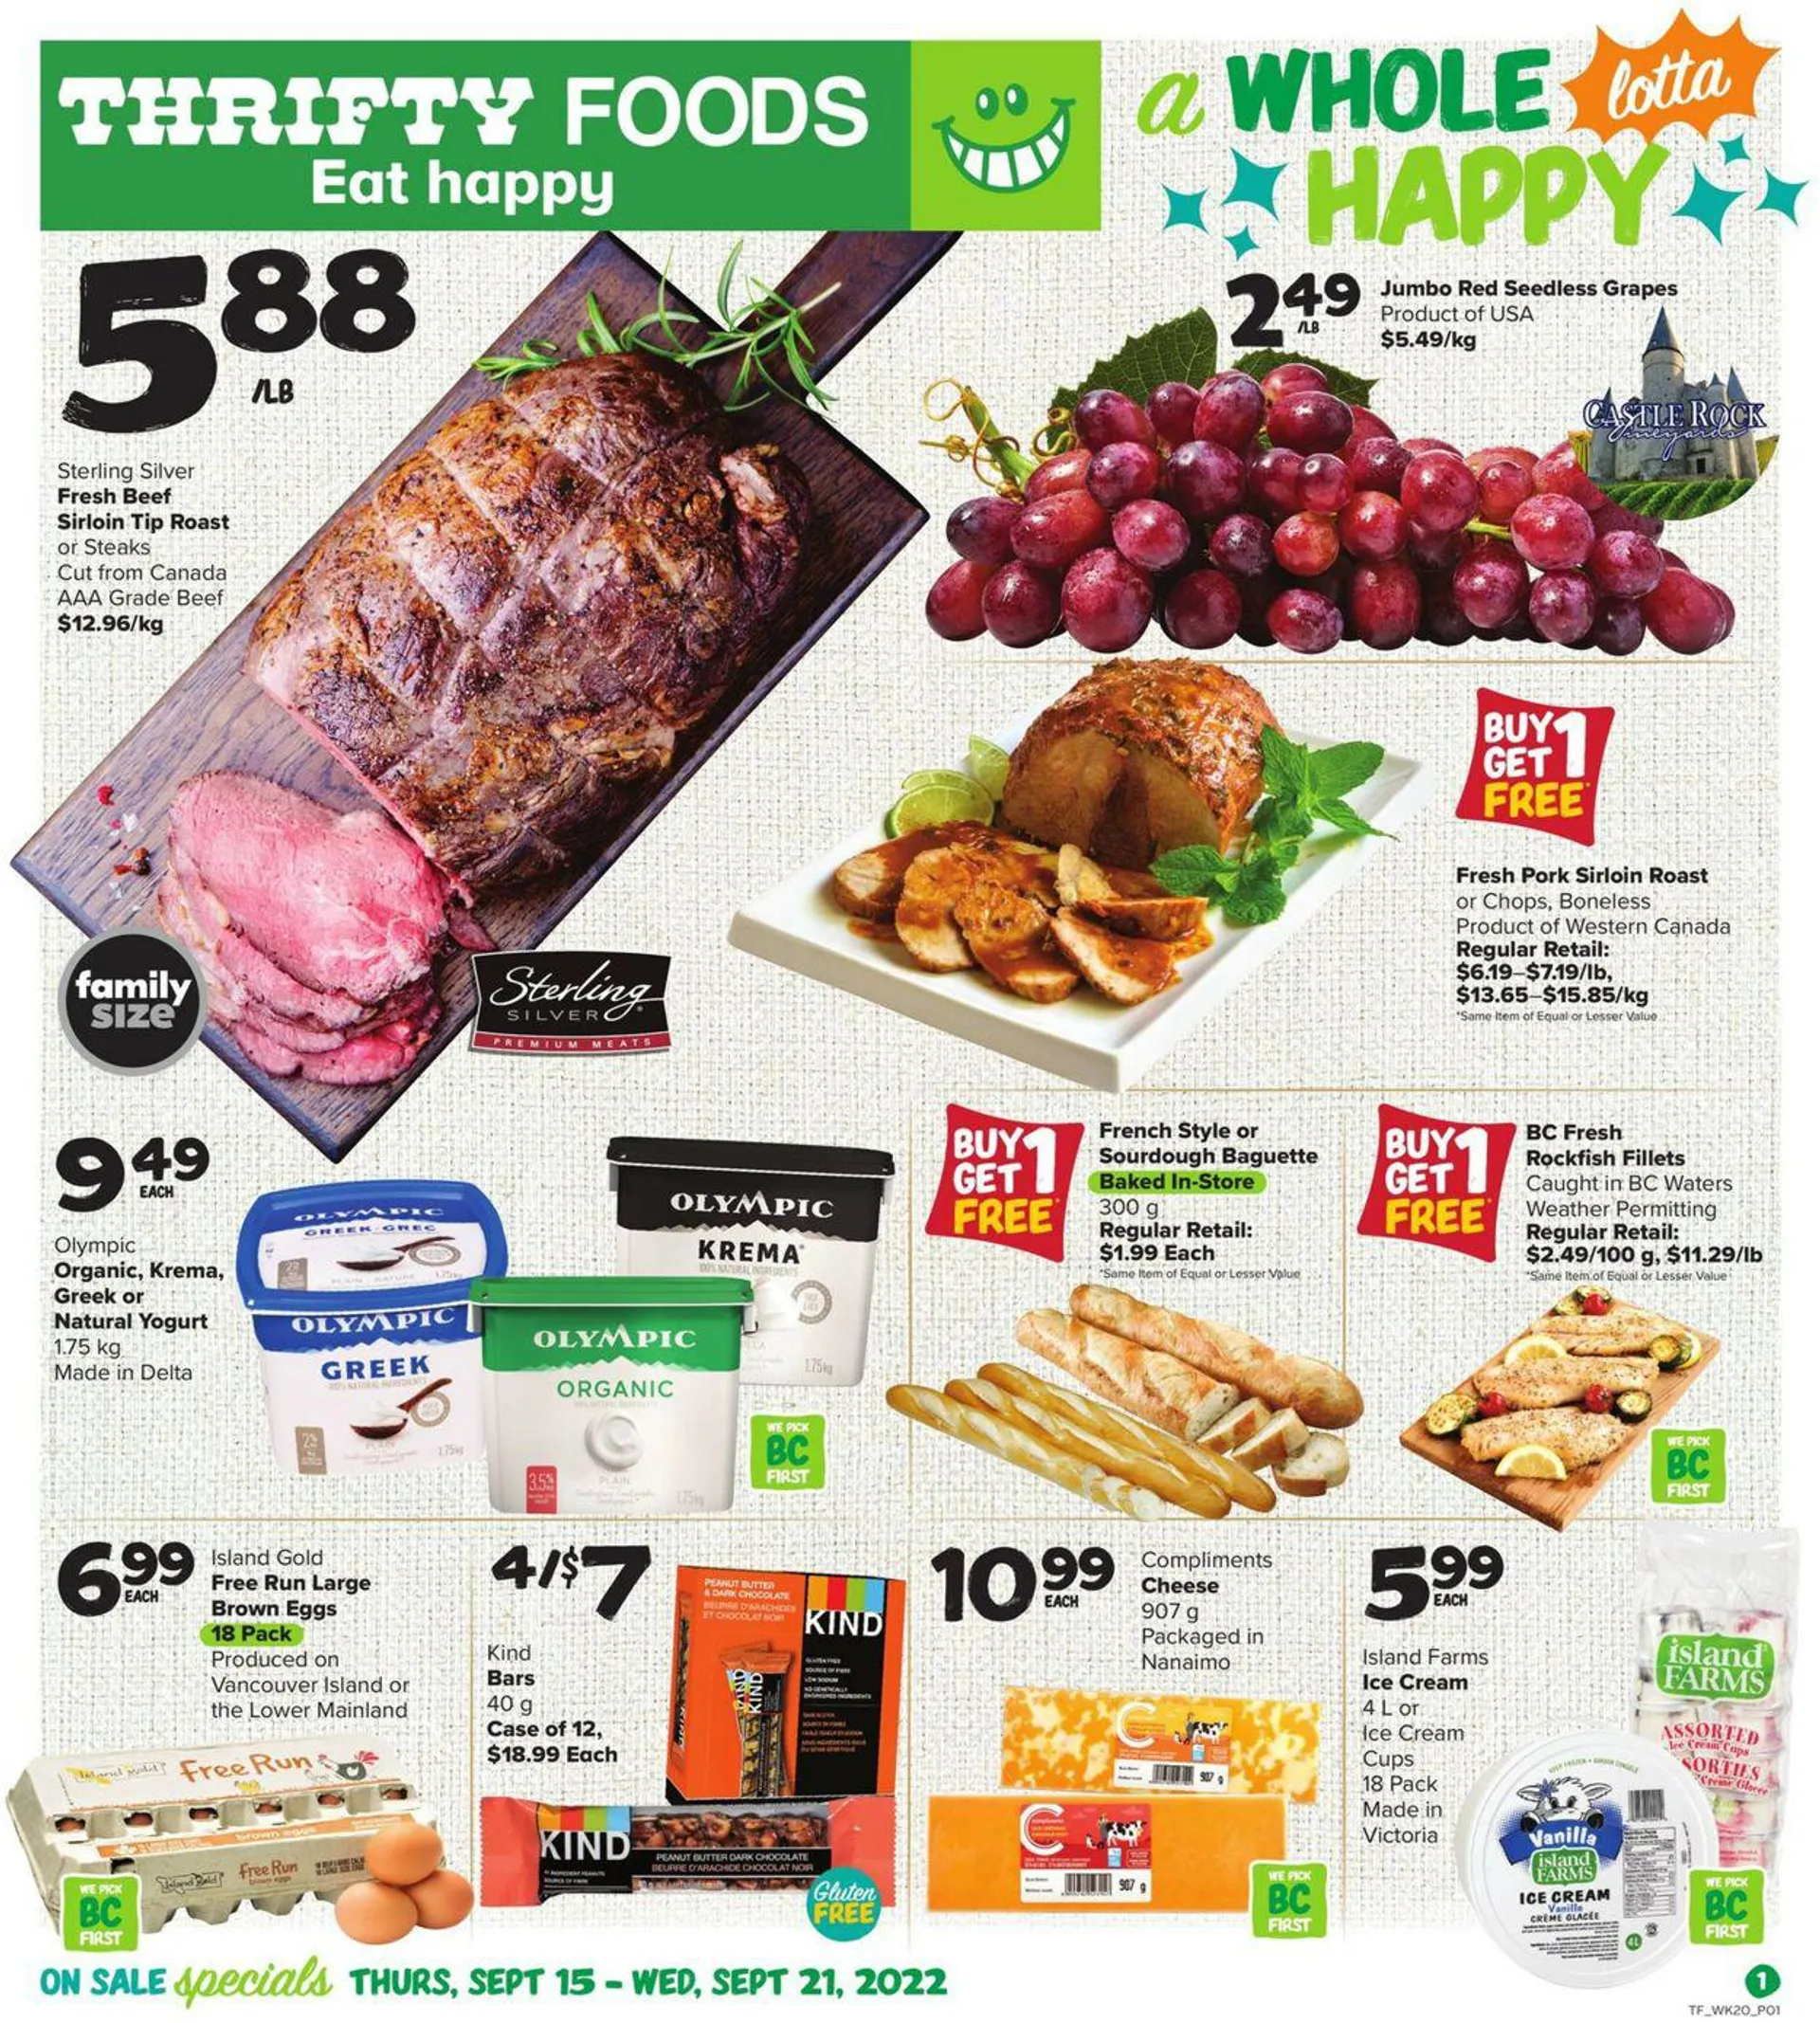 Thrifty Foods Current flyer - 1